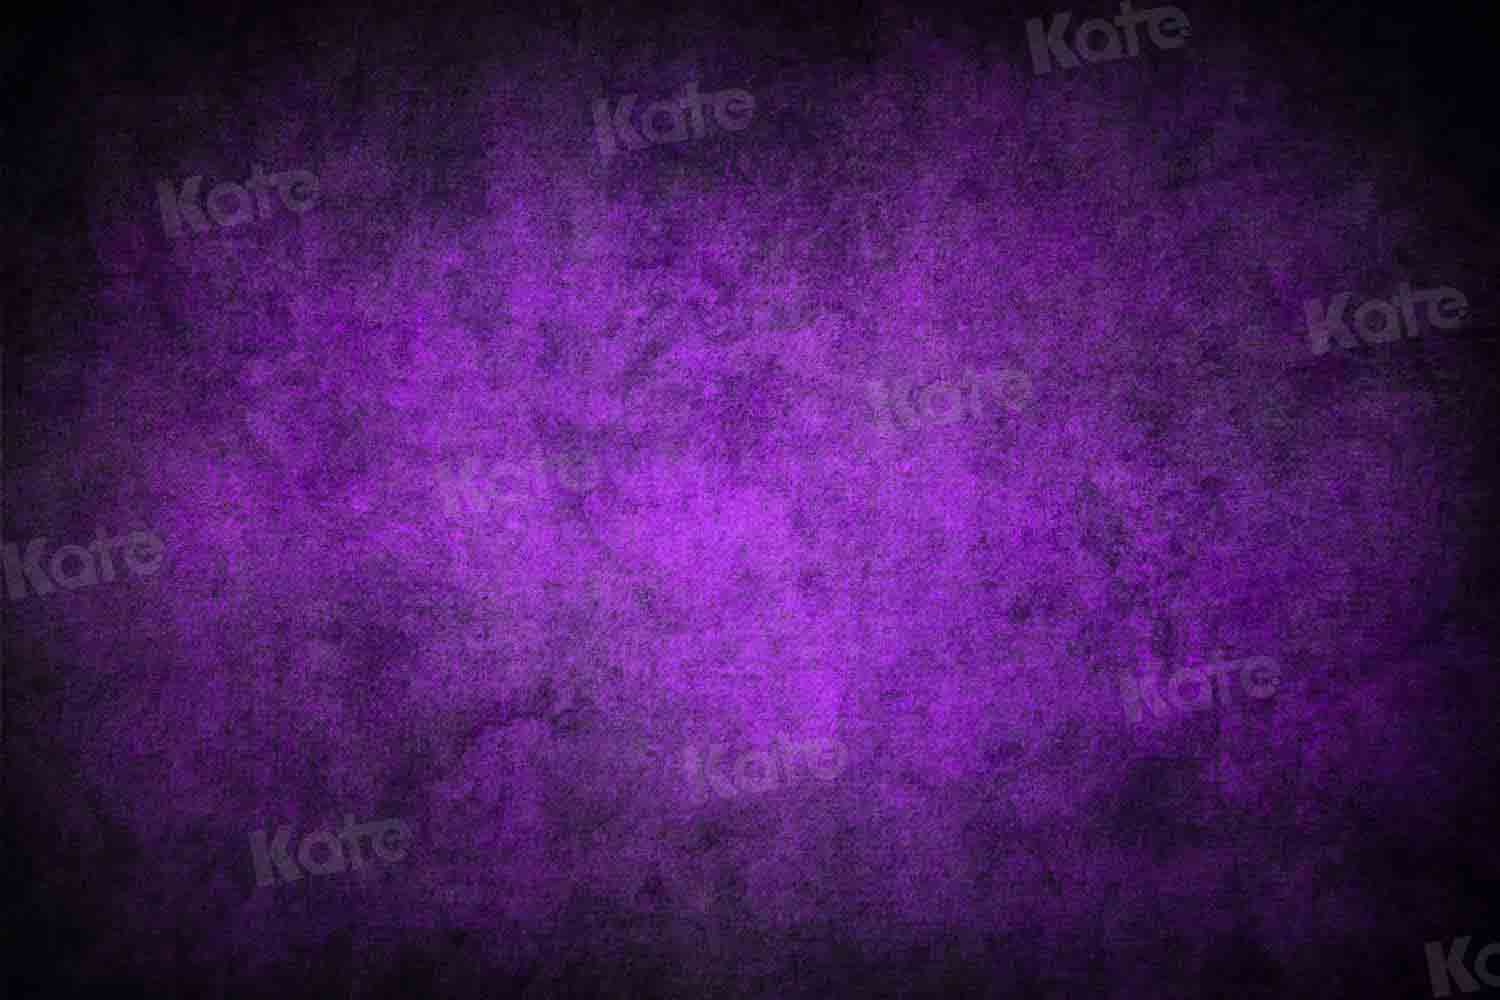 Kate Abstract Purple Backdrop Dream Designed by Kate Image